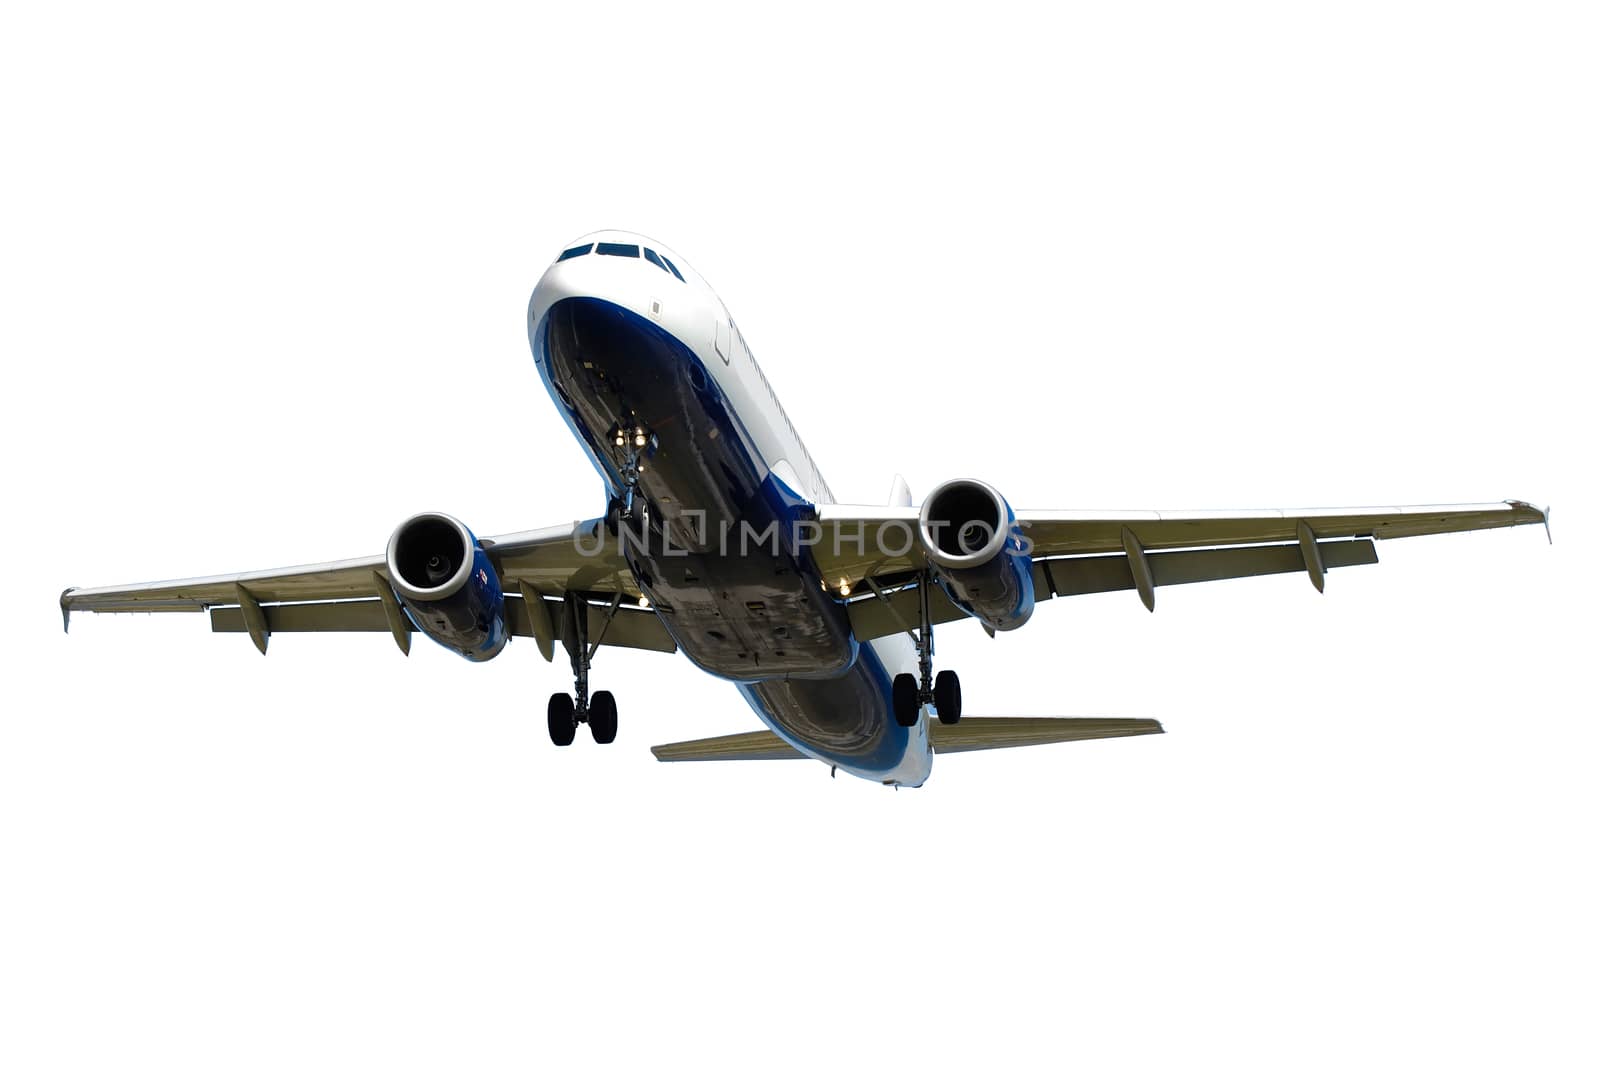 Plane isolated on a white background by cfoto